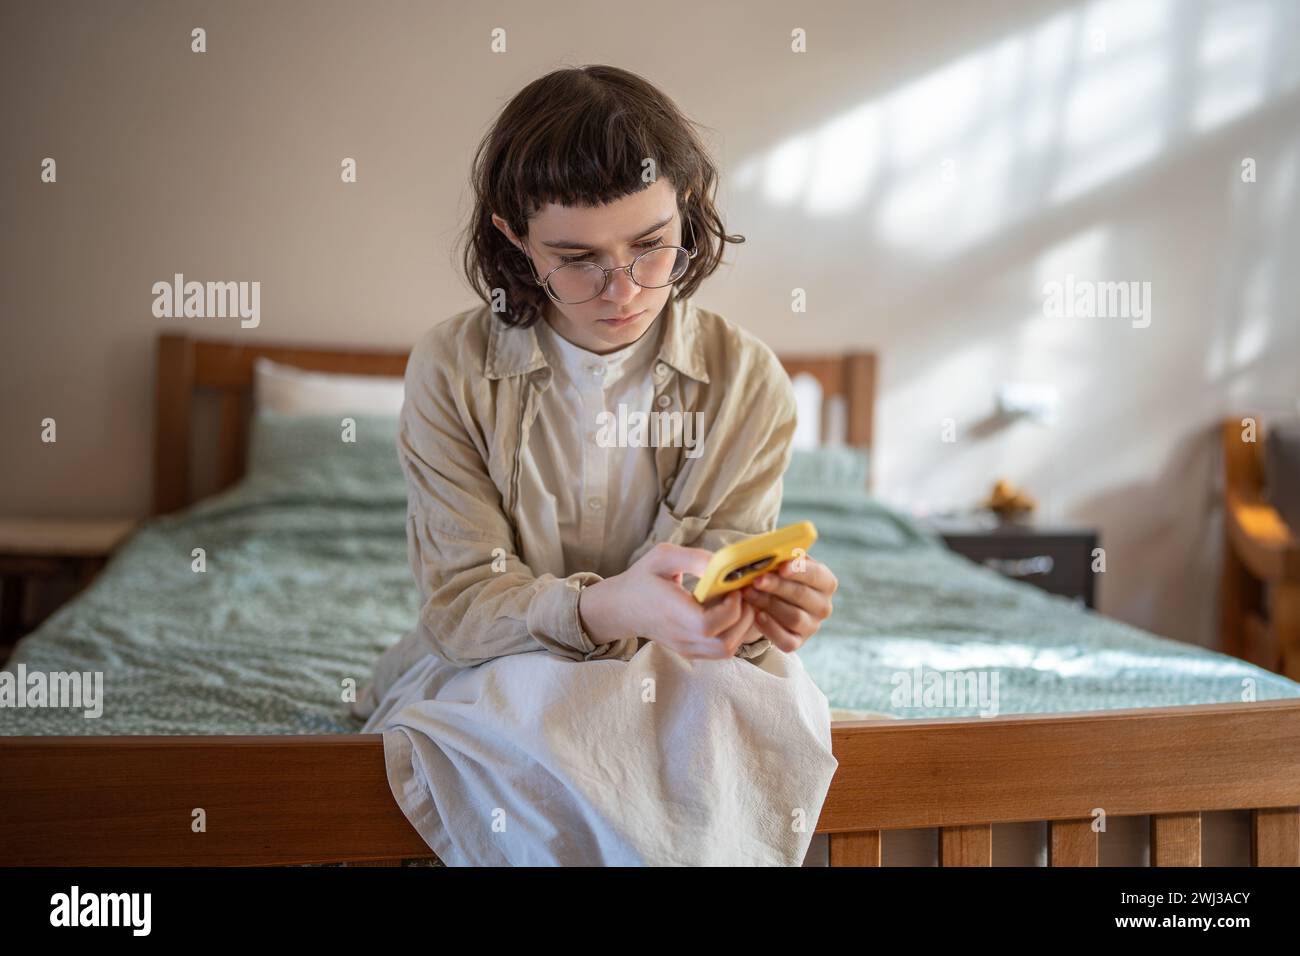 Outcast teenage girl obsessed with mobile phone, staying at home, feeling lonely, rejected, unhappy Stock Photo